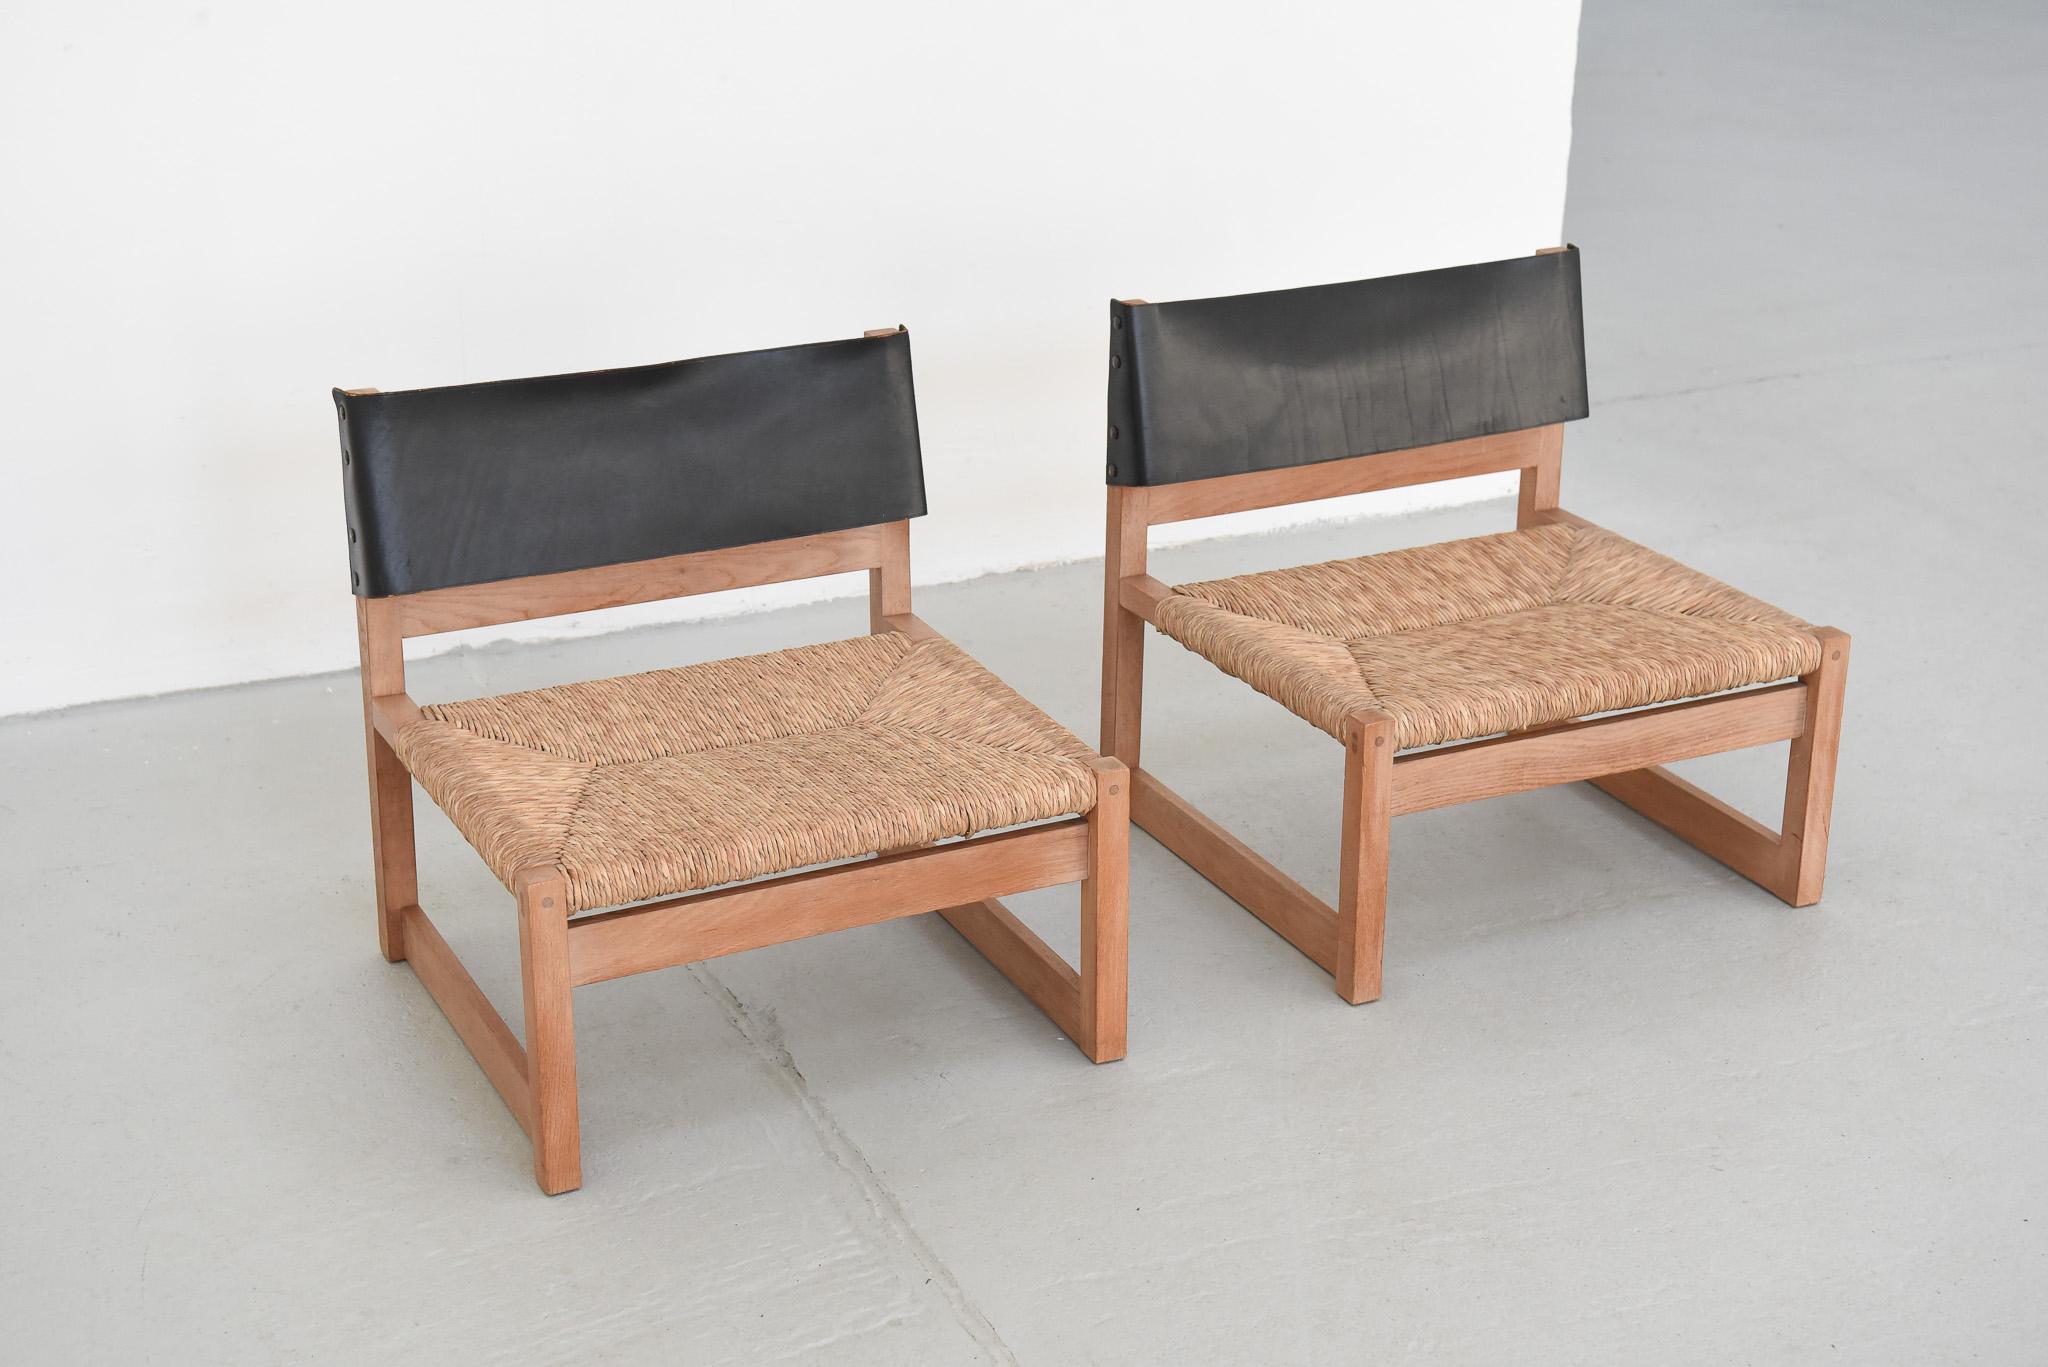 Extremely rare and minimalist lounge chairs, designed by spanish architect Javier Carvajal. These chairs were issued in a small edition by the madrilenian manufacturer BIOSCA.
Very  clear architectural lines and incredible attention to details with